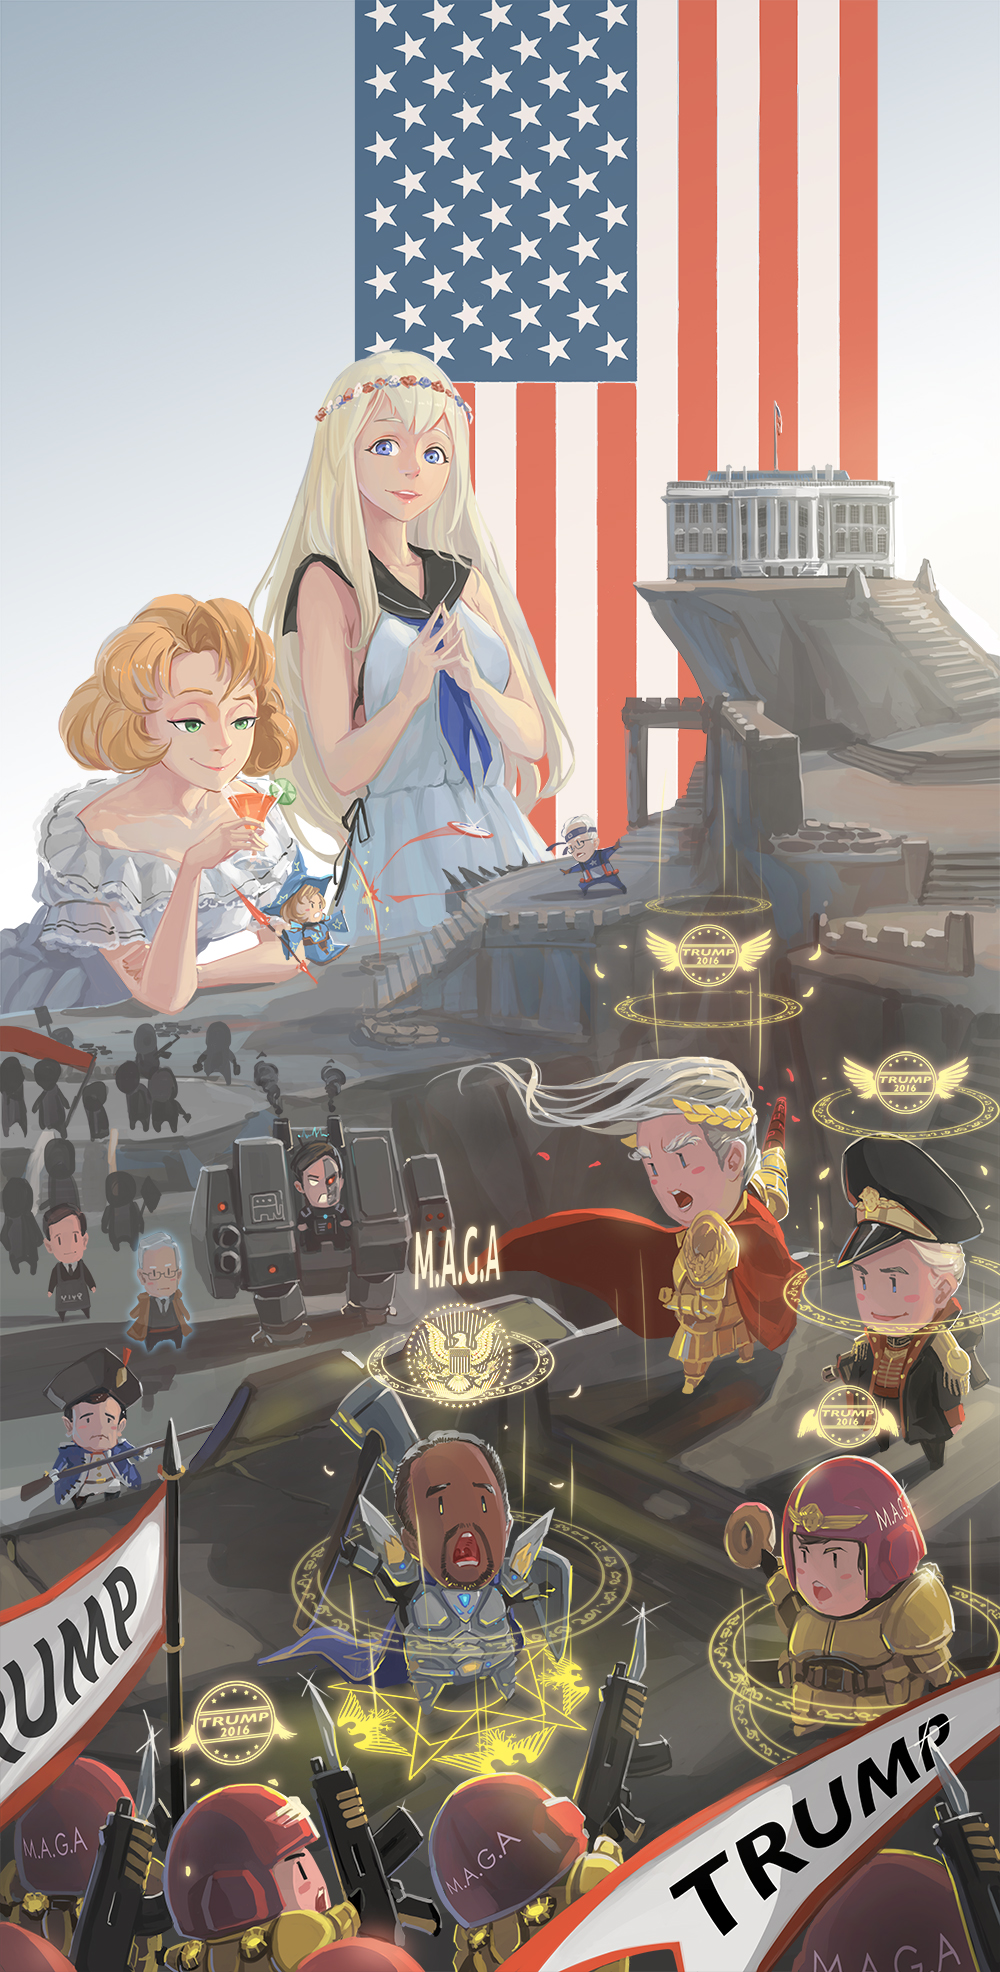 american_flag apron battle bayonet ben_carson bernie_sanders blonde_hair blue captain_america_(cosplay) character_request chris_christie cocktail cocktail_glass commissar cup donald_trump dreadnought drinking_glass emperor_of_mankind_(cosplay) eyes fairy_(kantai_collection) green_eyes gun highres hillary_clinton jeb_bush john_kasich looking_at_viewer marco_rubio marvel musket pacific rifle sima_naoteng star_wars ted_cruz uss_missouri_(bb-63) warhammer warhammer_40k weapon white_hair white_house